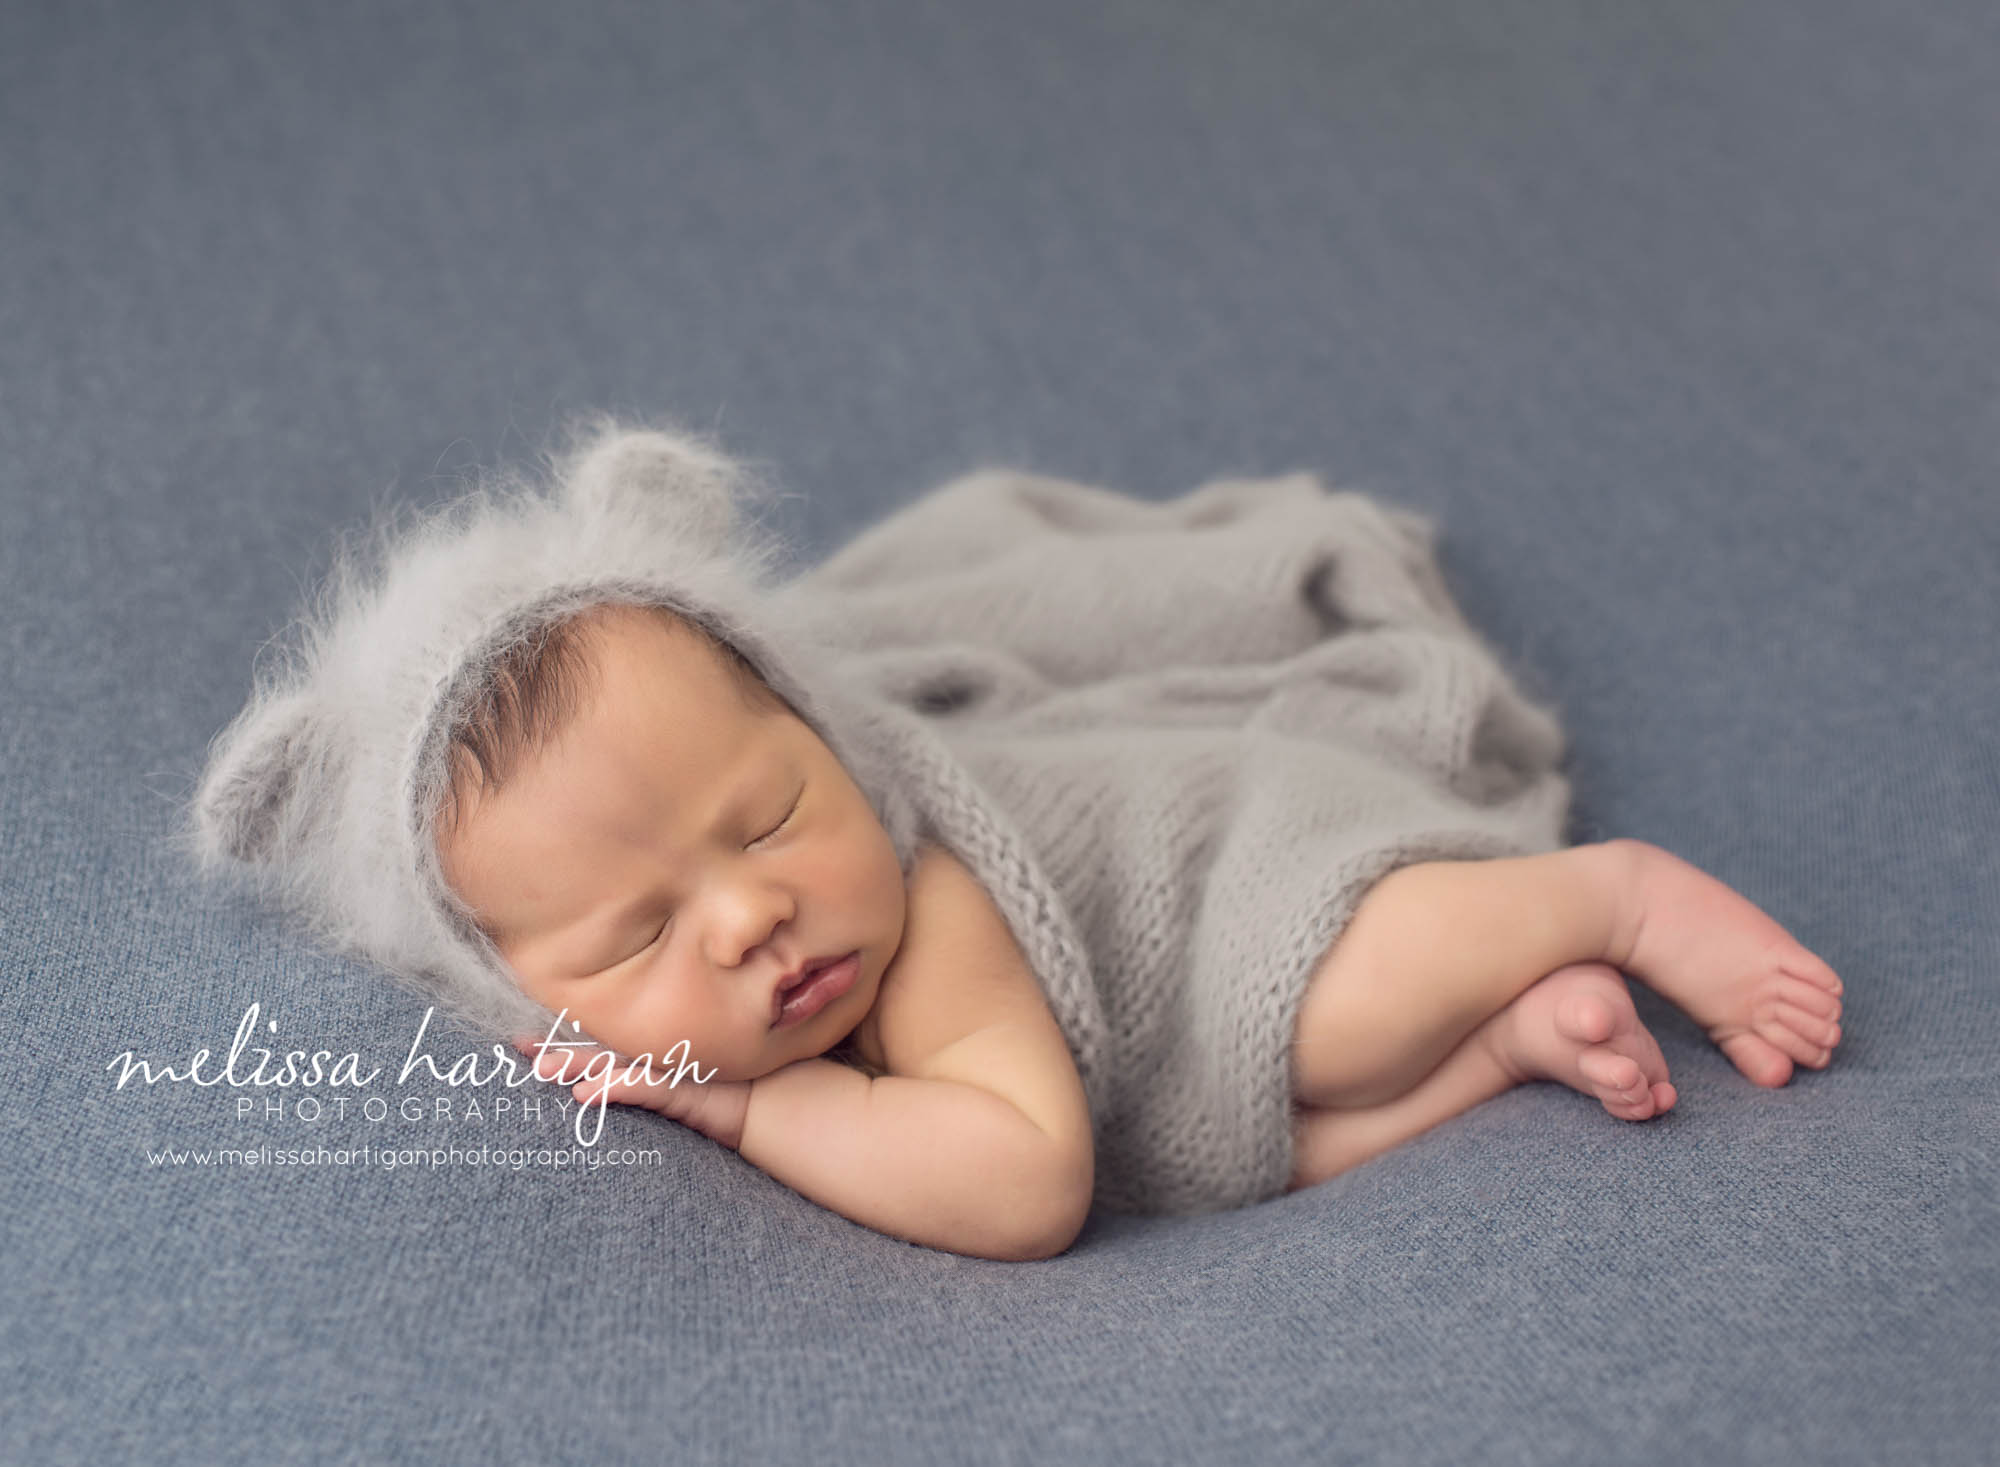 Melissa Hartigan Photography Maternity and Newborn Connecticut Photographer Lucas Newborn Session Baby boy laying on blue blanket with light blue knit blanket over him wearing blue knit hat with ears